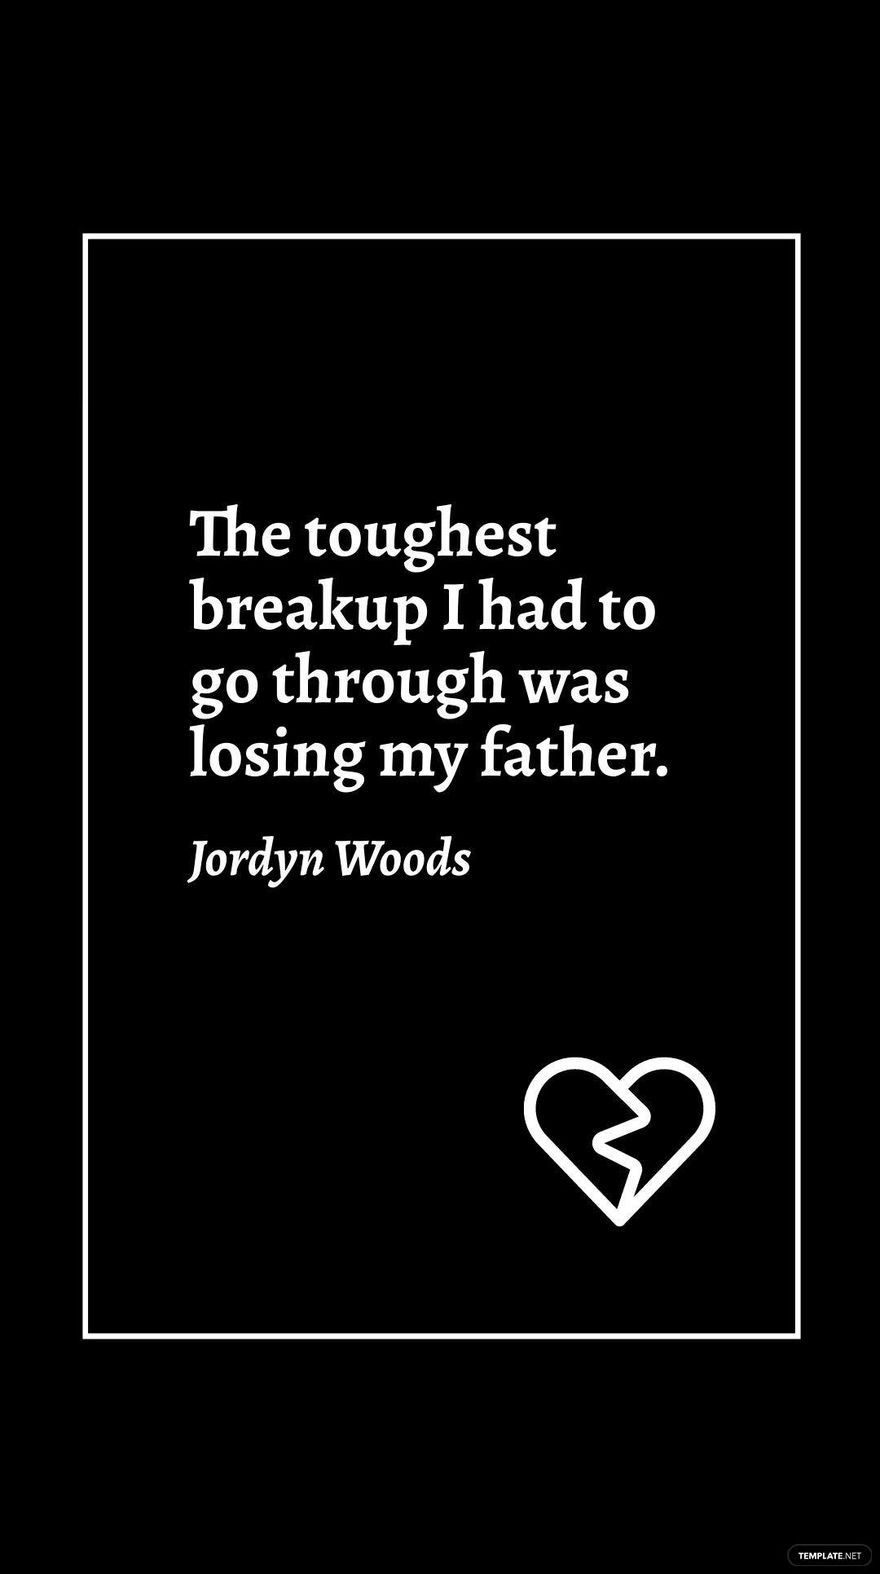 Free Jordyn Woods - The toughest breakup I had to go through was losing my father. in JPG